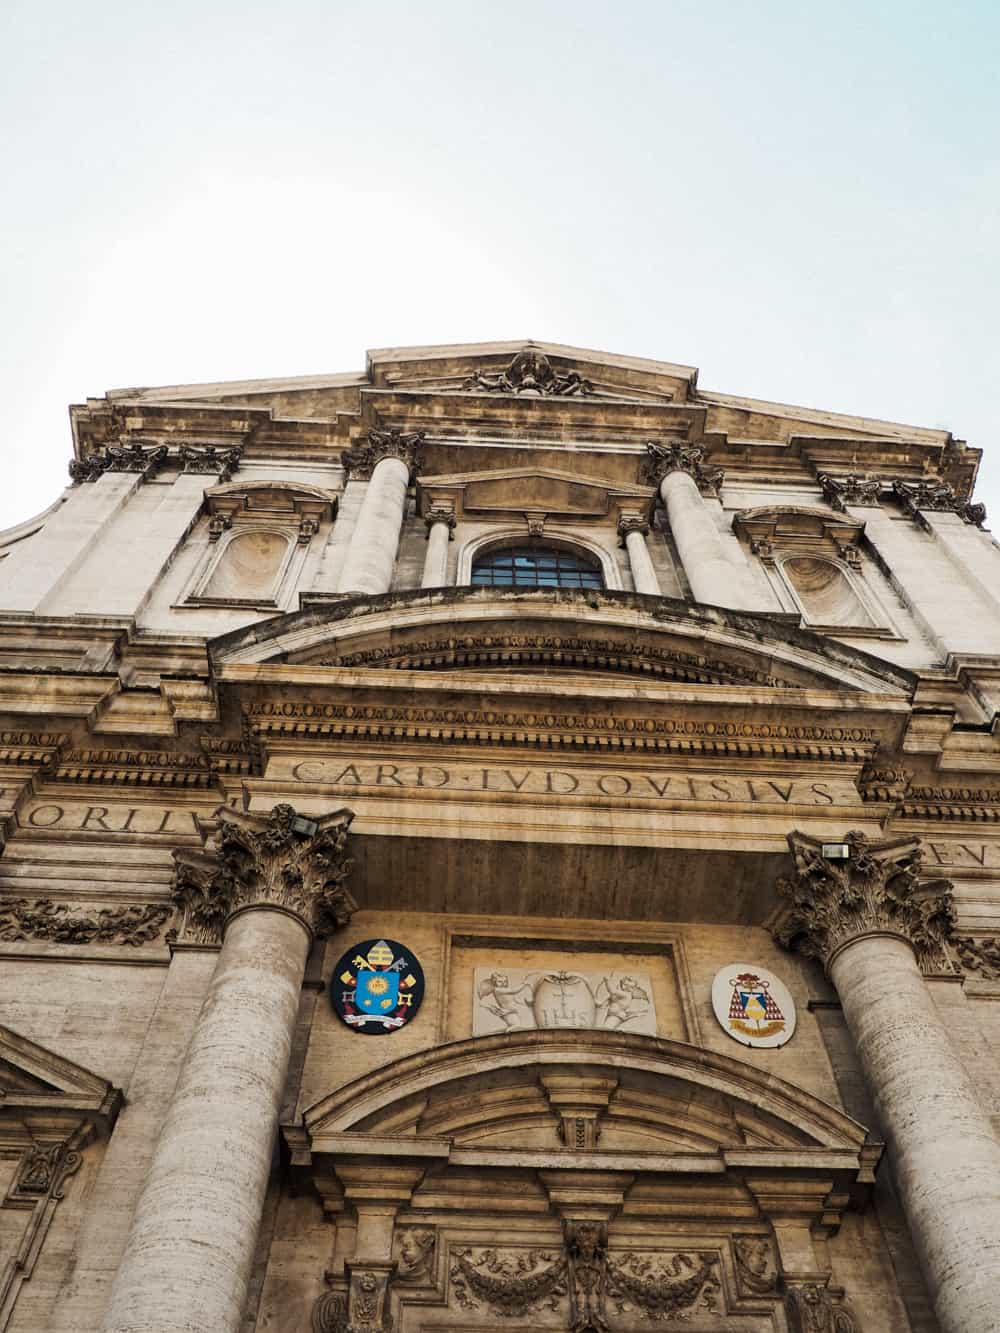 The Church of St. Ignatius of Loyola at Campus Martius in Rome, Italy is a baroque church that had its groundbreaking in 1626 and was completed in 1650.  | via Autumn All Along